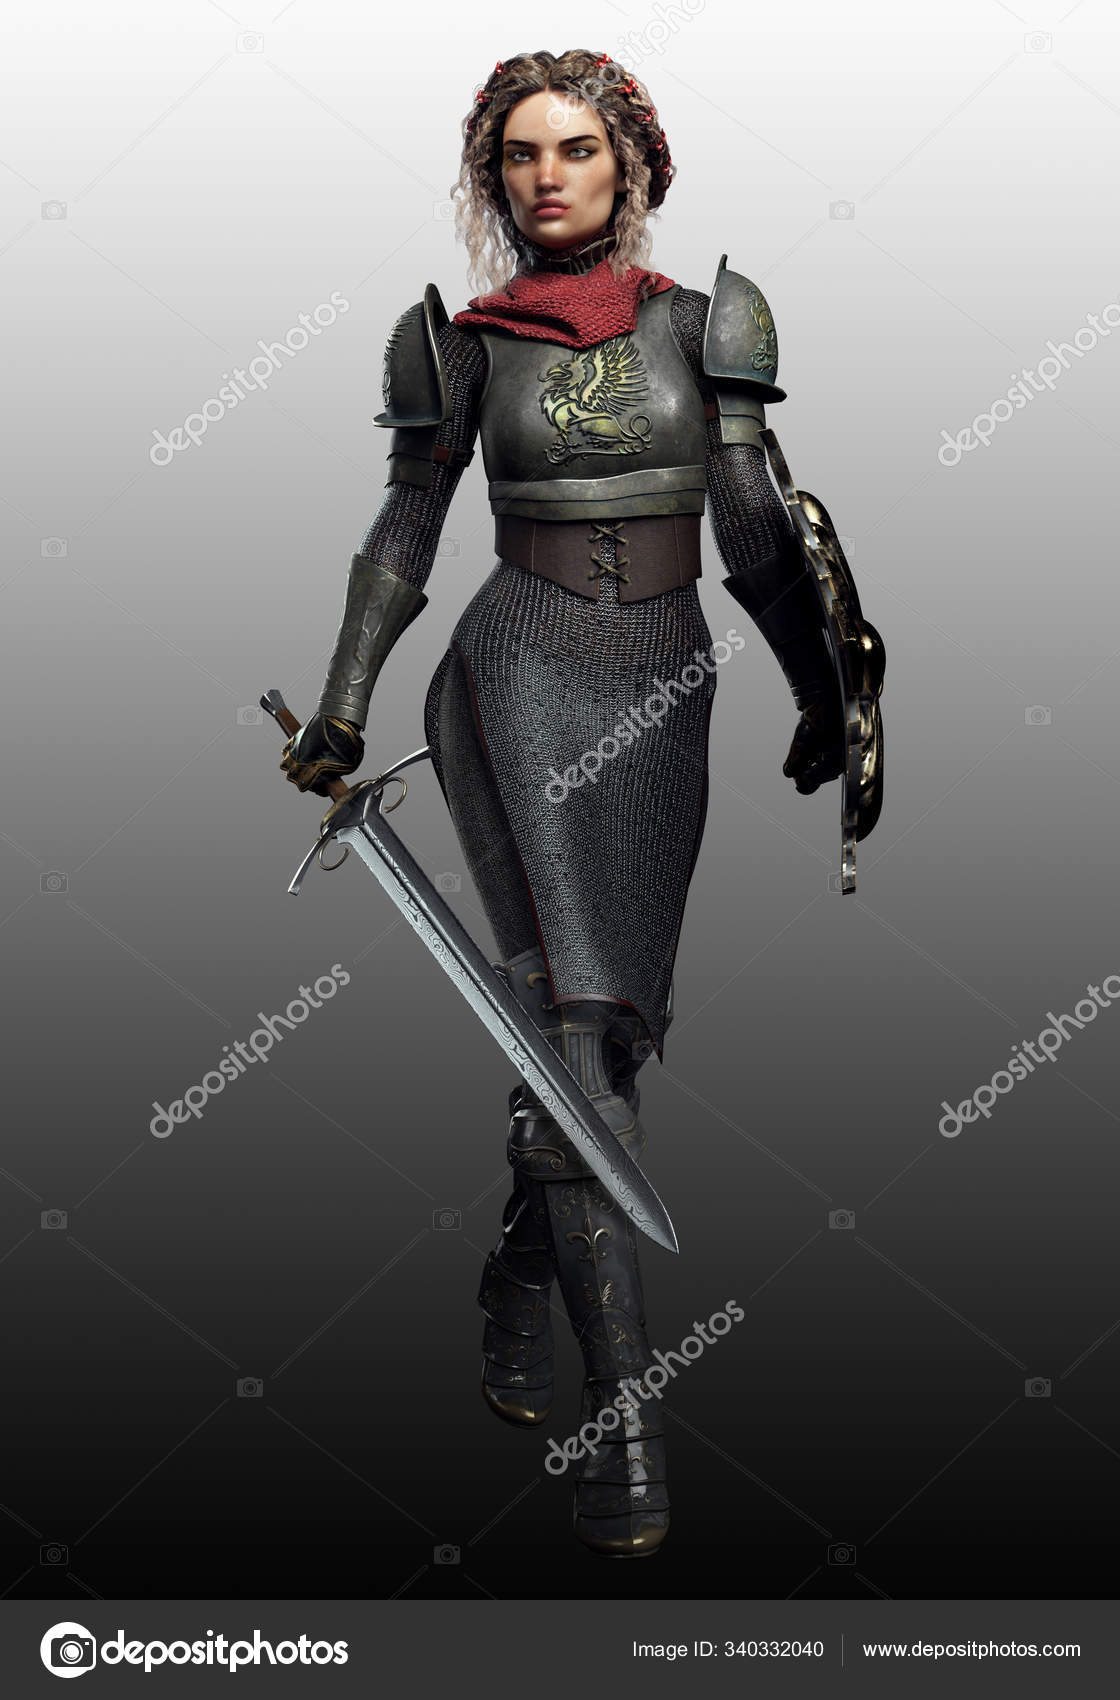 Lady Knight Silver Medieval Armor Chain Mail Stock Photo by